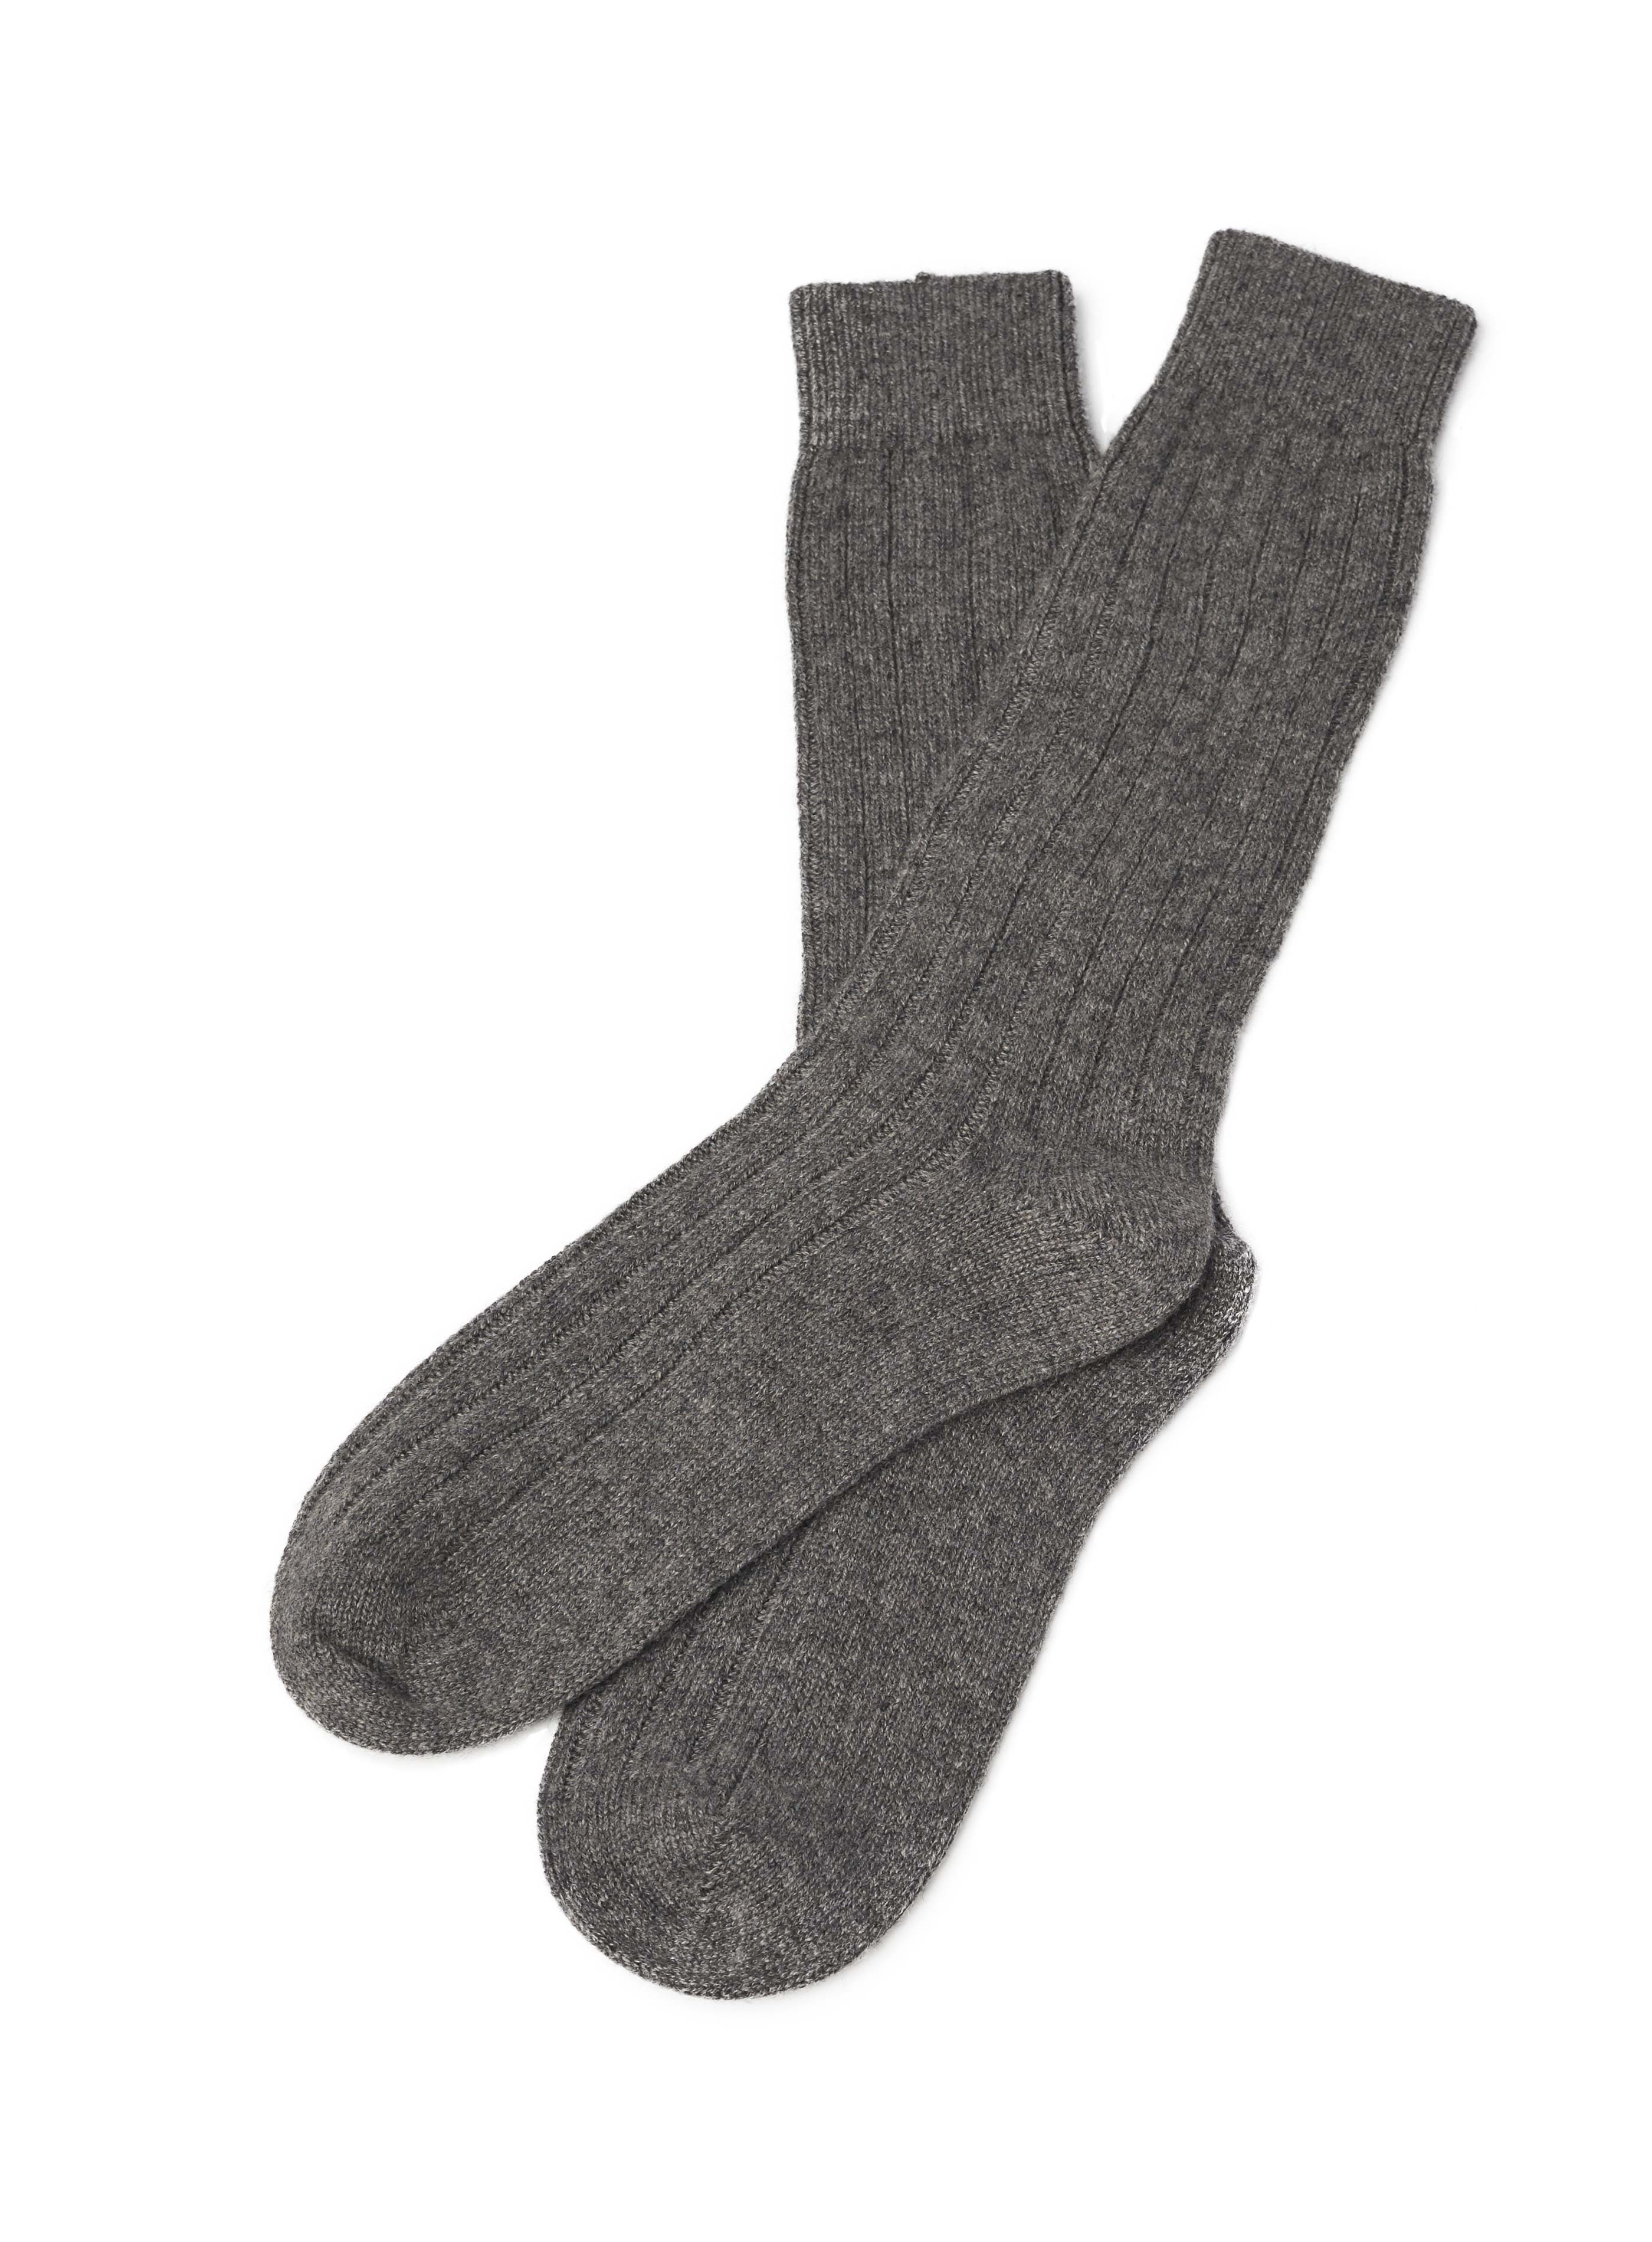 Pure Cashmere Socks (Charcoal, Large/Extra Large)